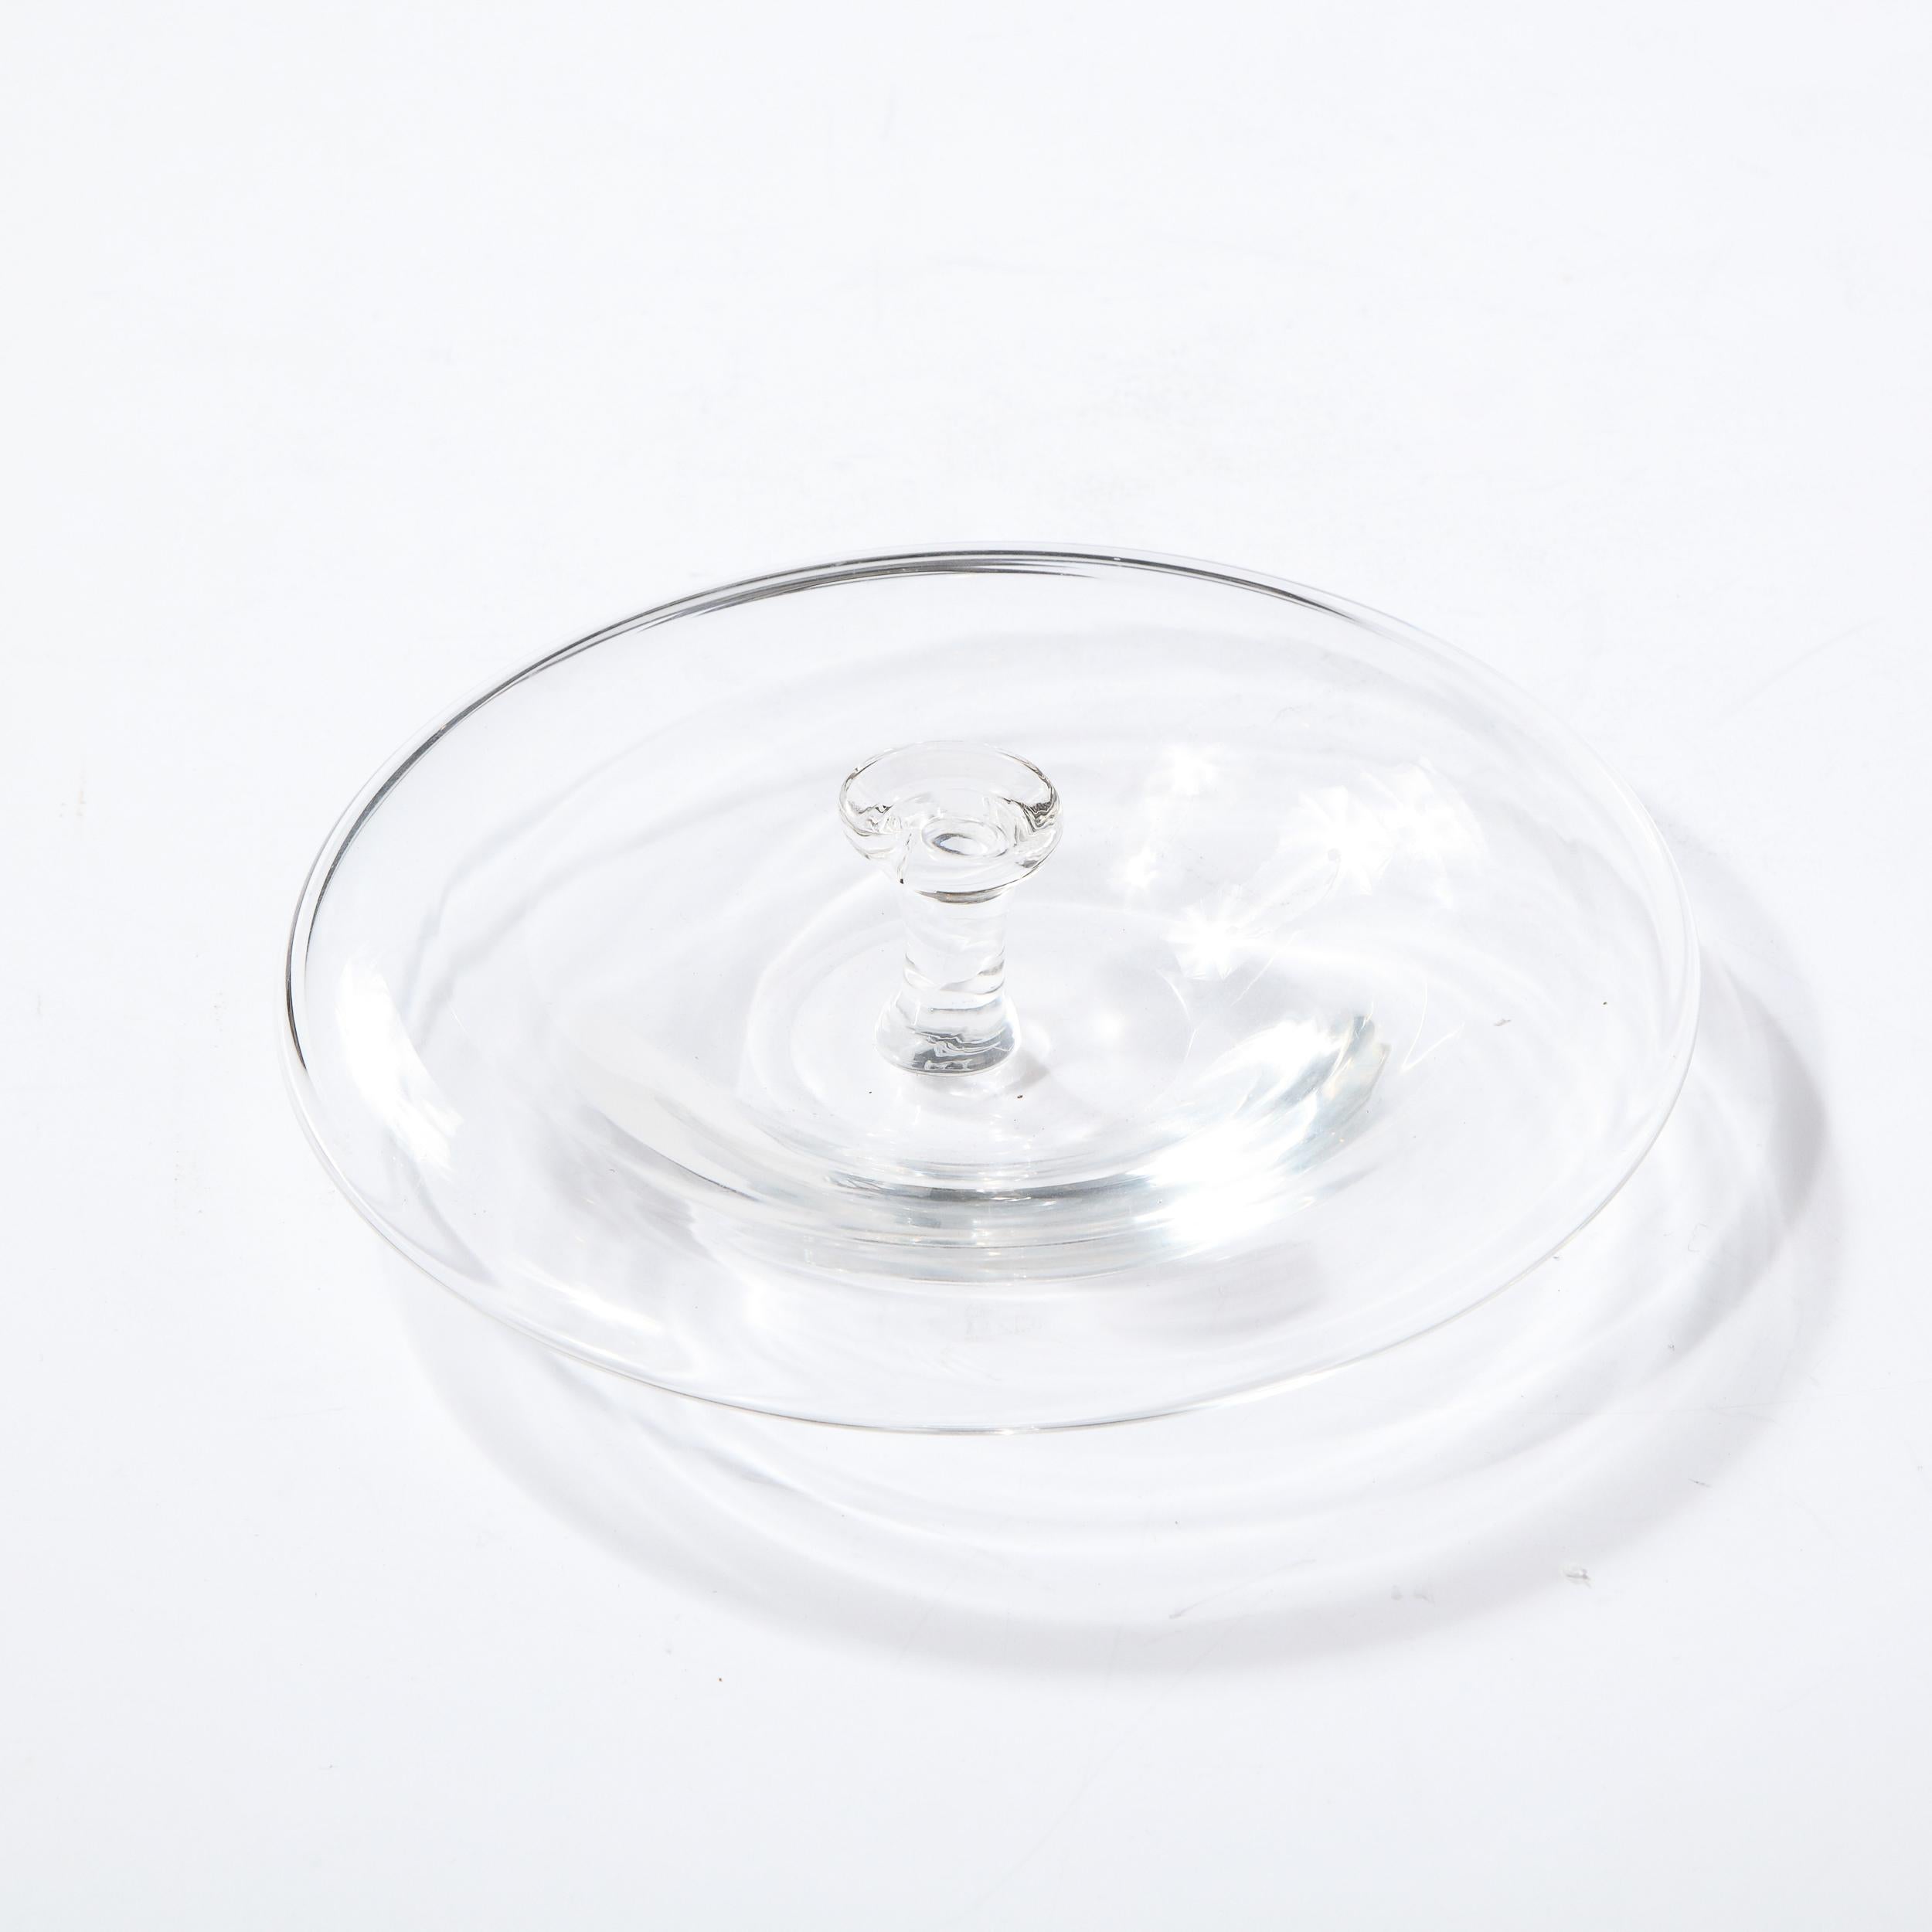 Mid-Century Modern Translucent Glass Decorative Dish by Elsa Peretti for Tiffany In Good Condition For Sale In New York, NY